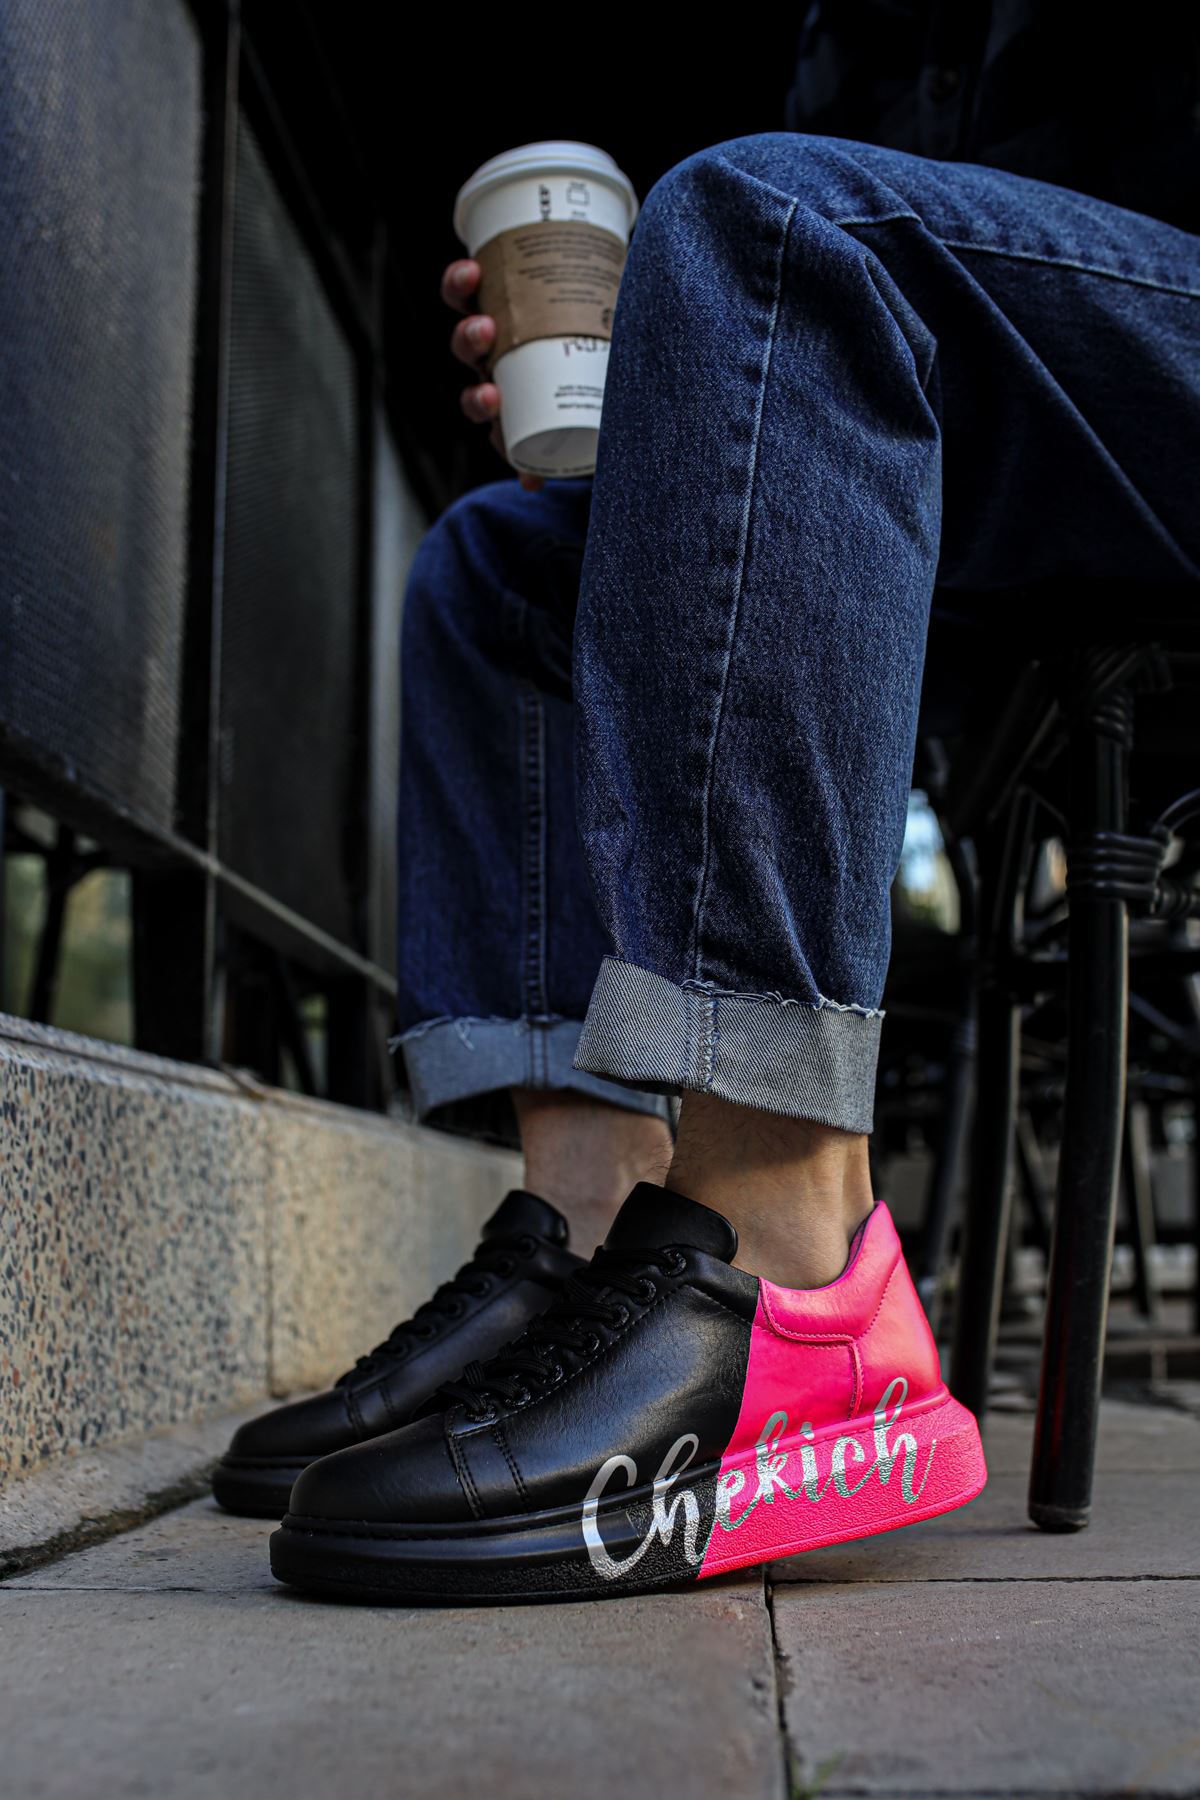 CH254 Men's Unisex Black-Pink Casual Sneaker Sports Shoes - STREETMODE ™